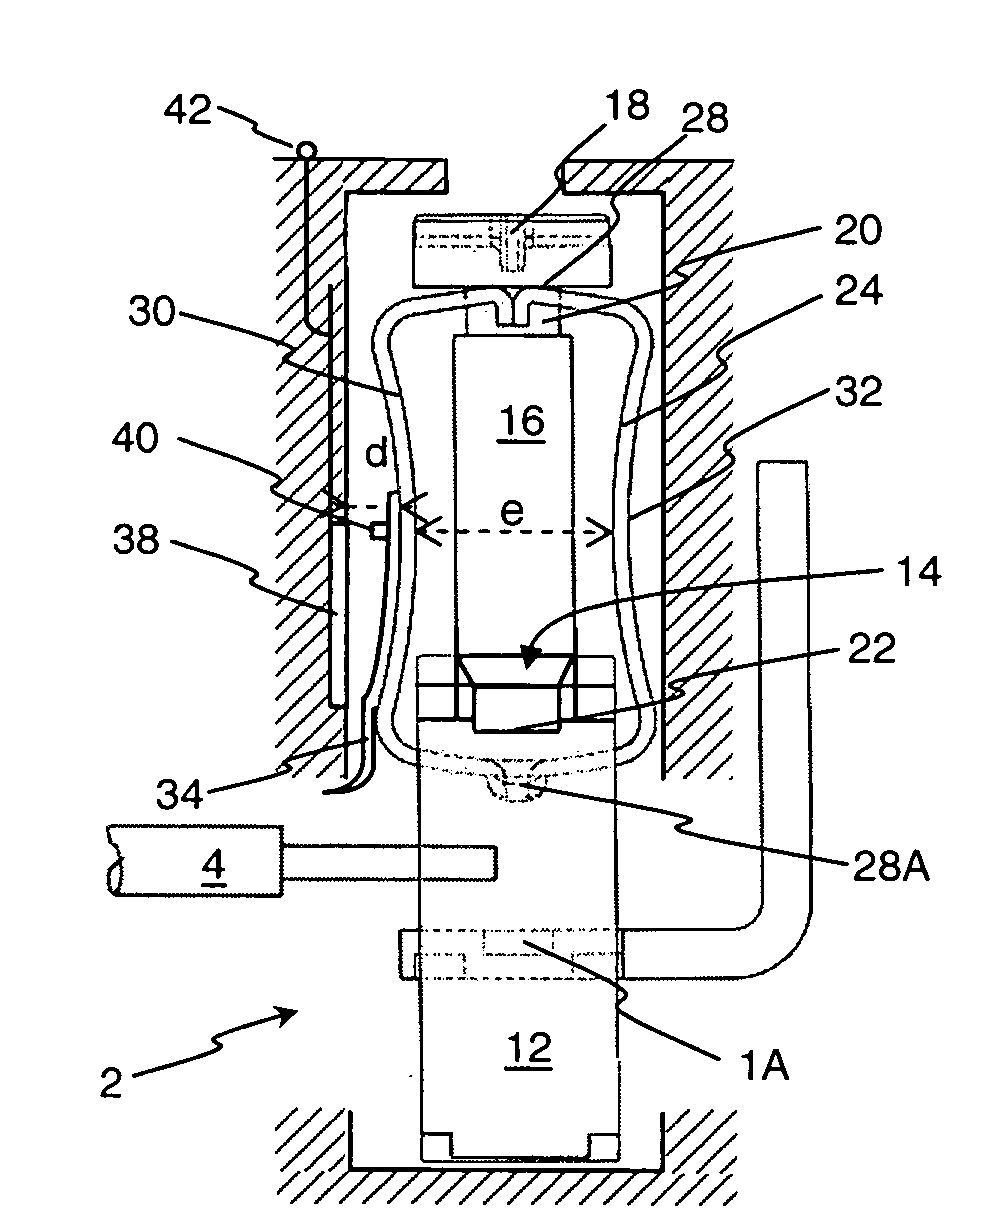 Connection system enabling the tightening torque of a screw terminal to be indicated